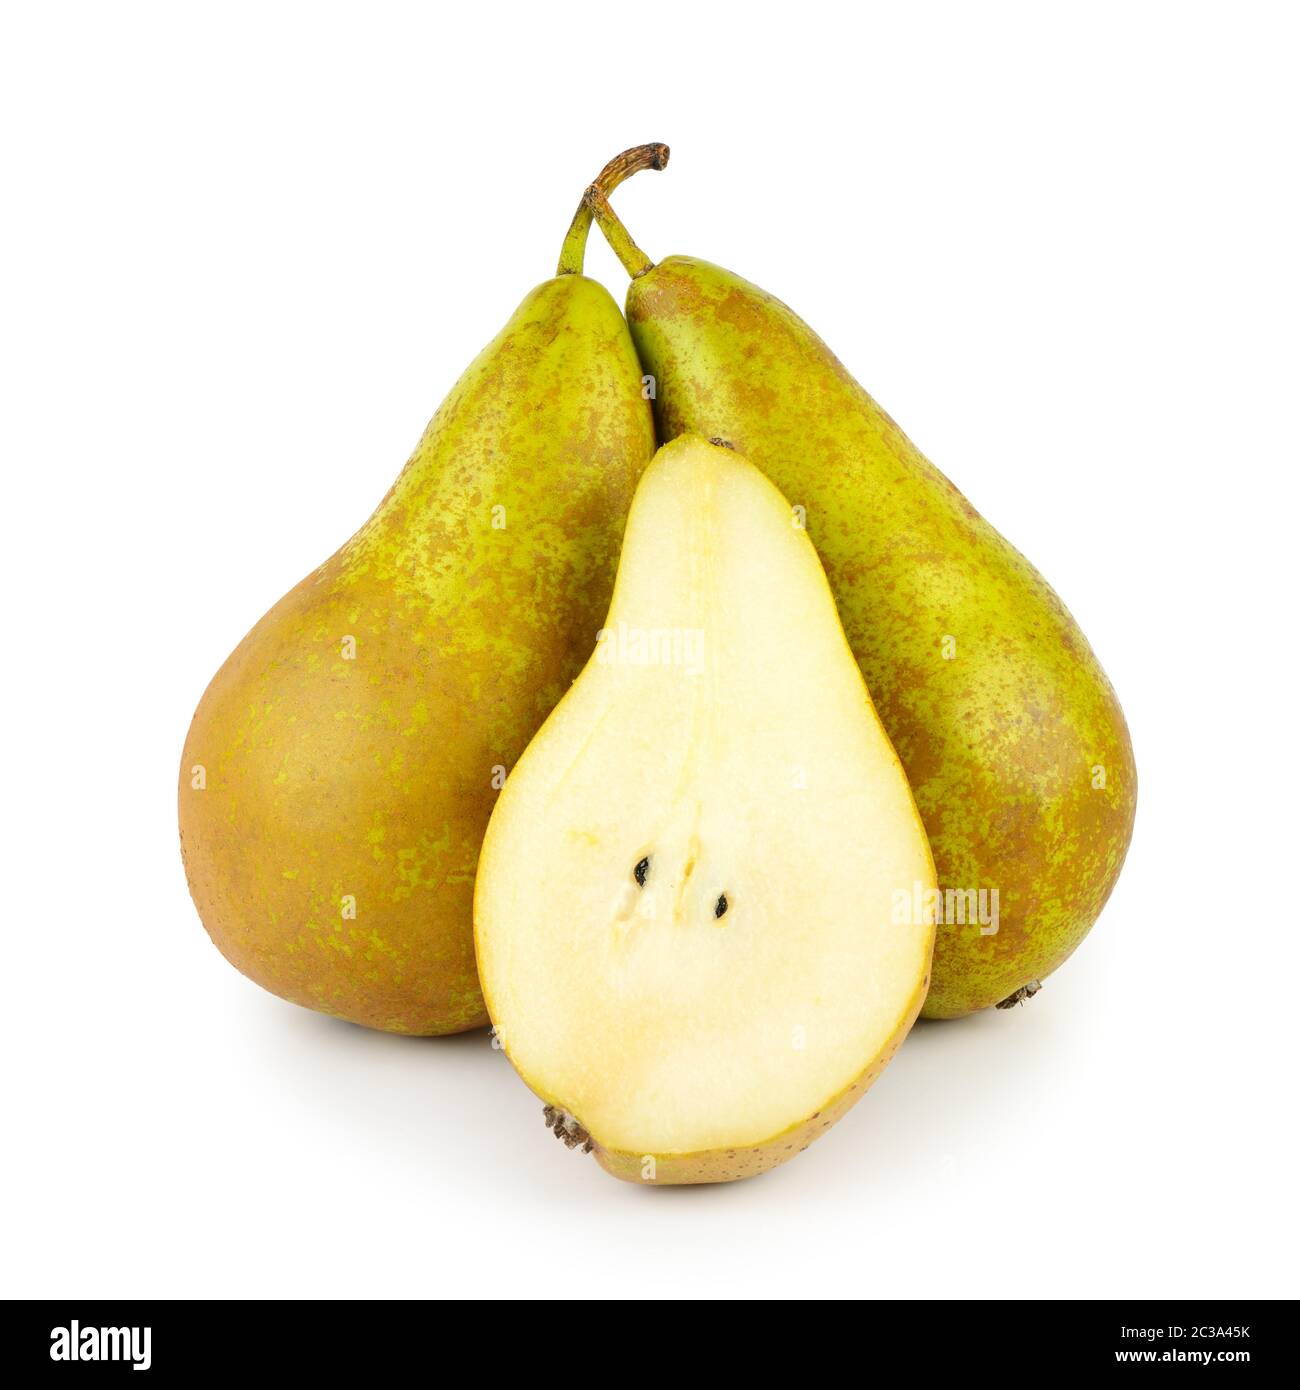 Juicy ripe pears isolated on white background. Stock Photo